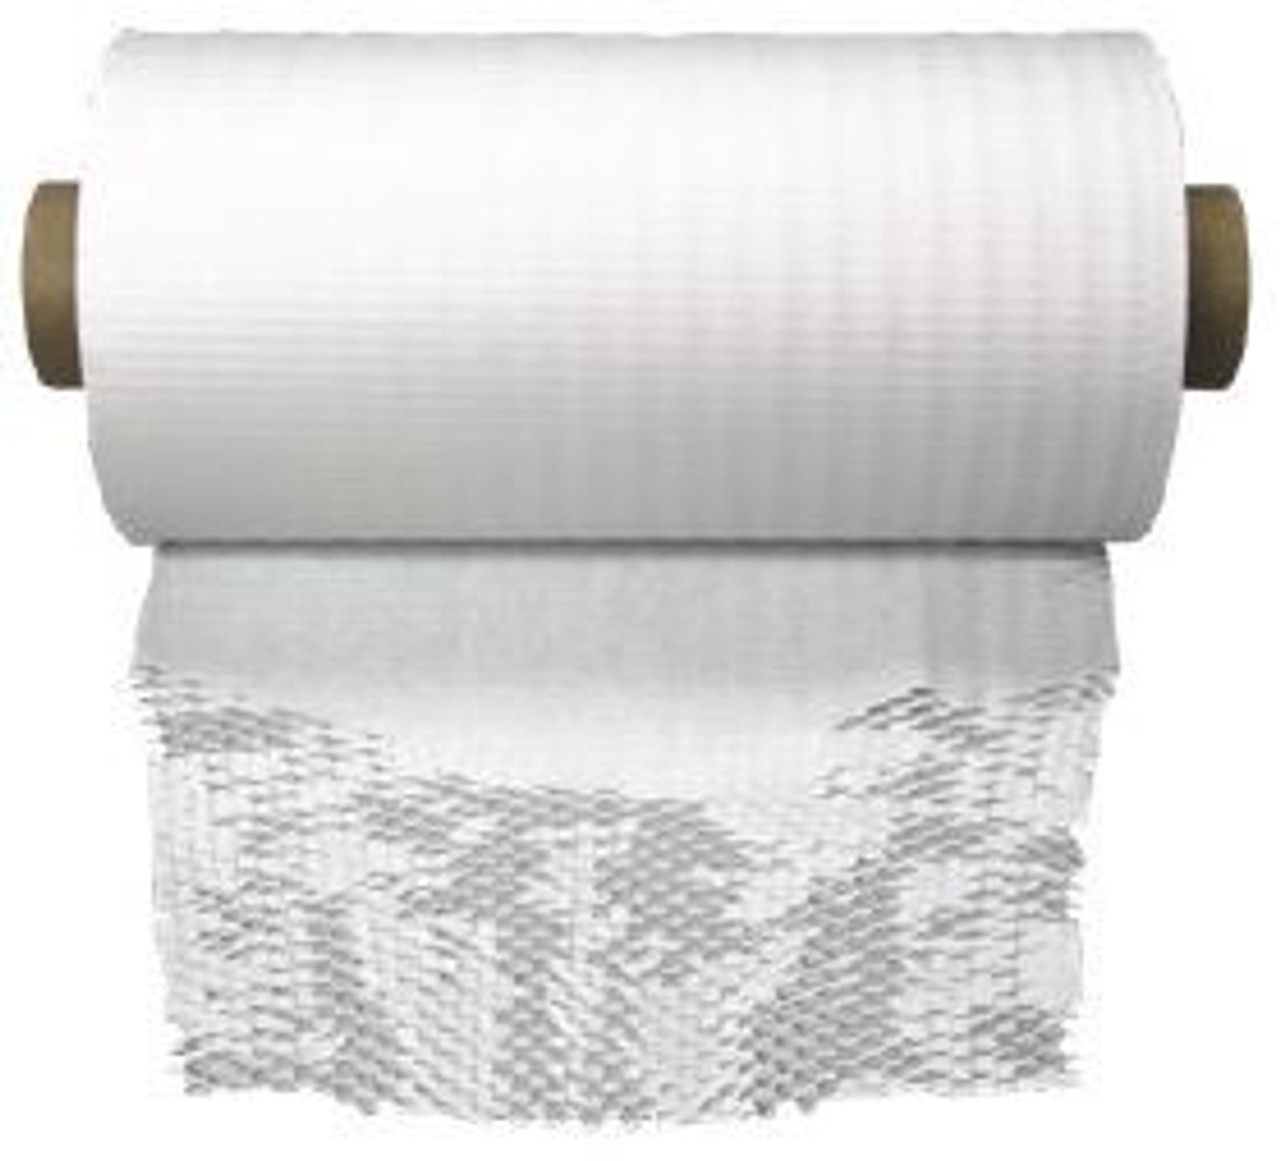 15 x 300' HexcelWrap Refill Roll for MP-300W Honeycomb Packing Paper  Station, White buy in stock in U.S. in IDL Packaging